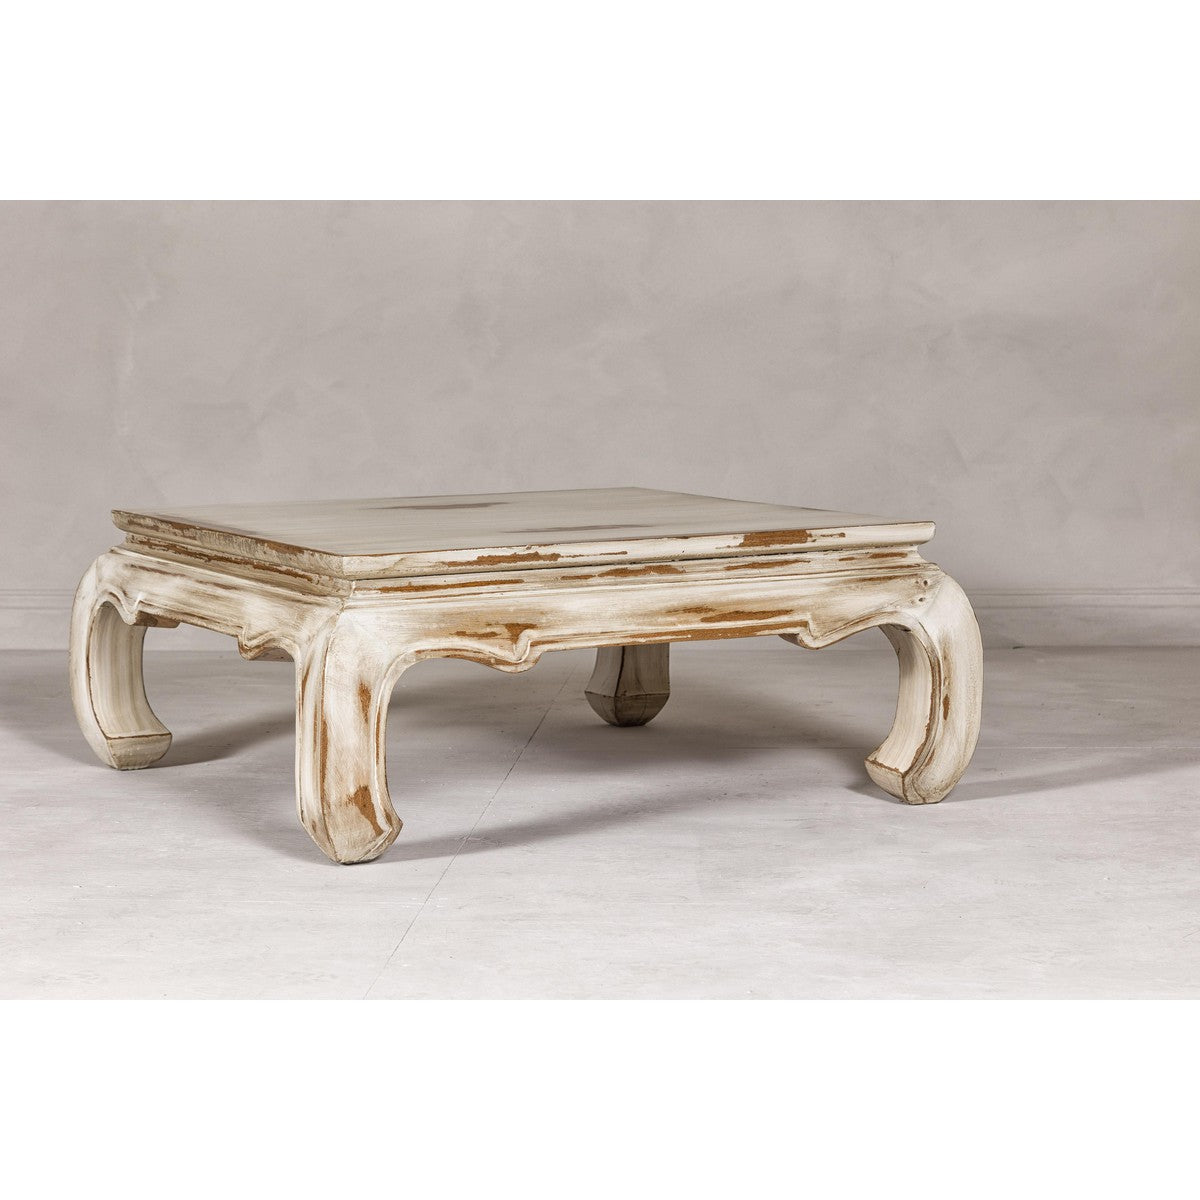 Distressed White Coffee Table with Chow Legs and Square Top, Vintage-YN7957-4. Asian & Chinese Furniture, Art, Antiques, Vintage Home Décor for sale at FEA Home